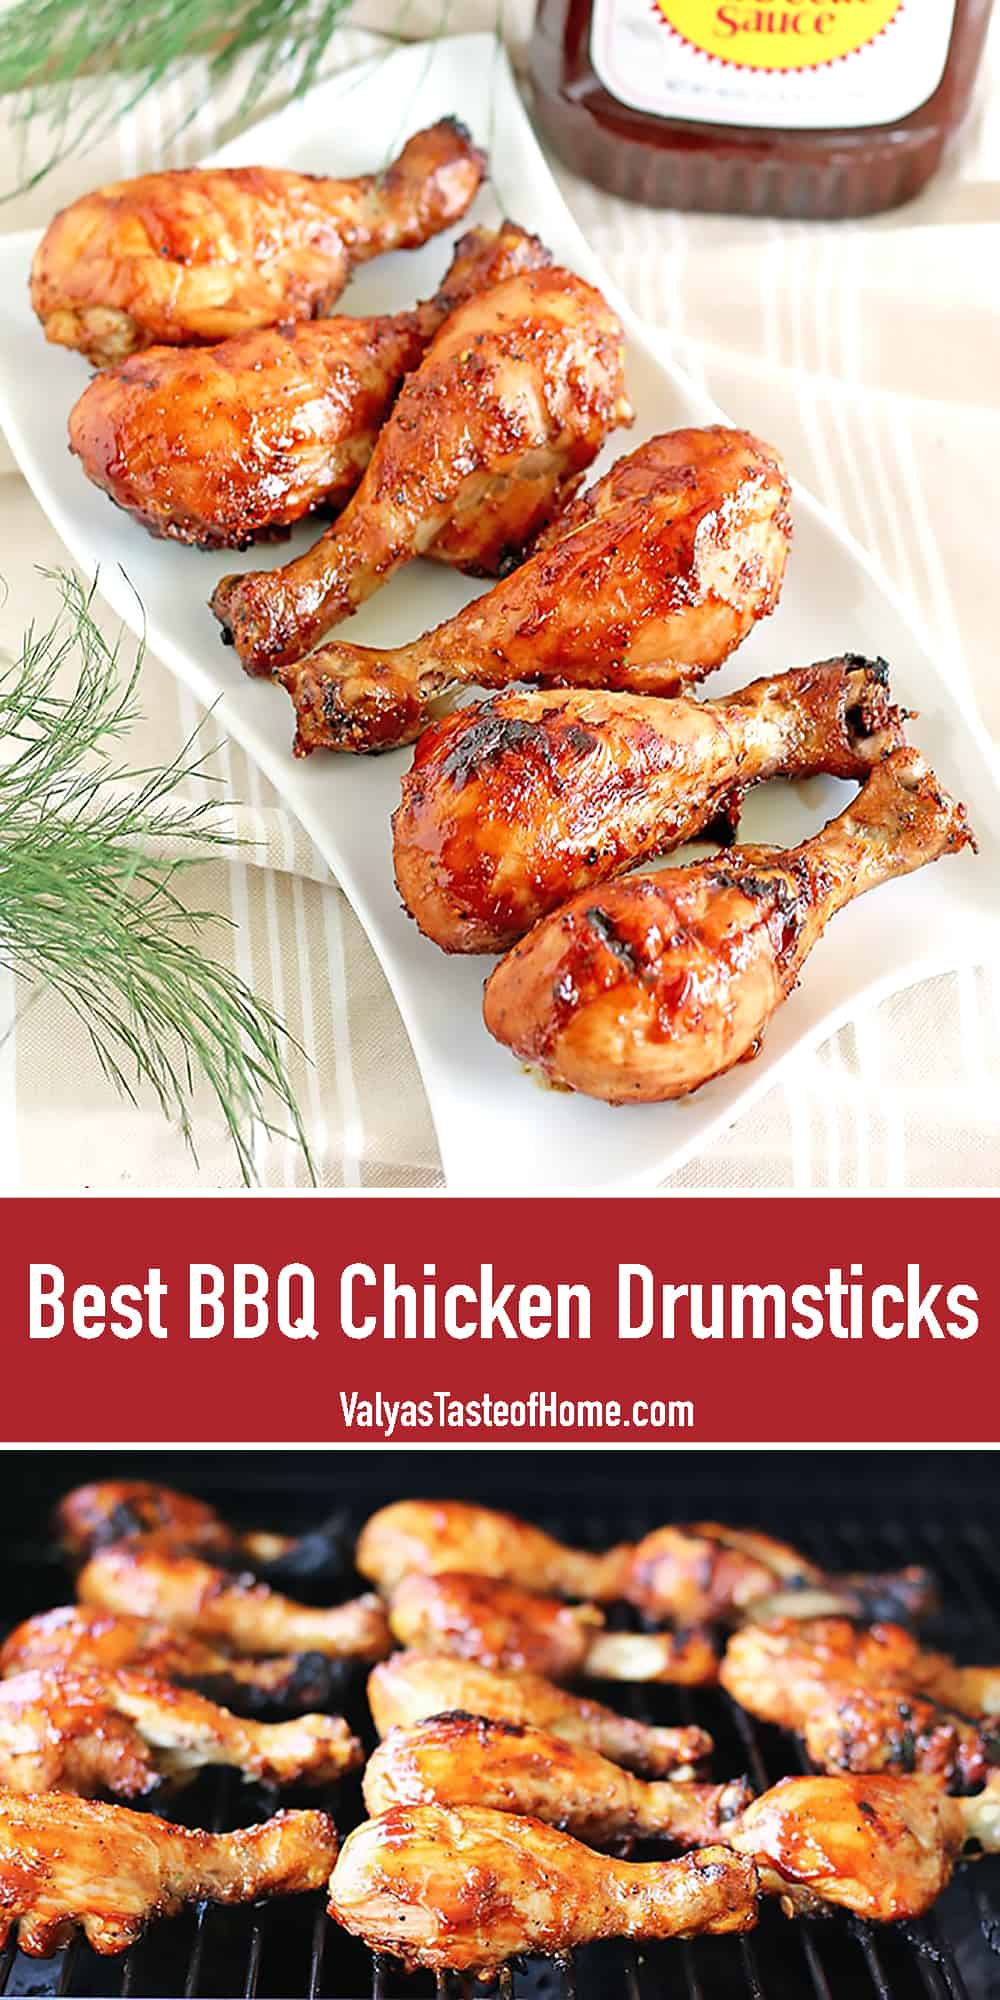 Grilled BBQ Chicken Drumsticks Need a quick and easy grilling recipe for BBQ tonight? Try this one! These BBQ Chicken Drumsticks are truly one of the best. We've been making these drumsticks for ages and they quickly fly off the serving tray each time.